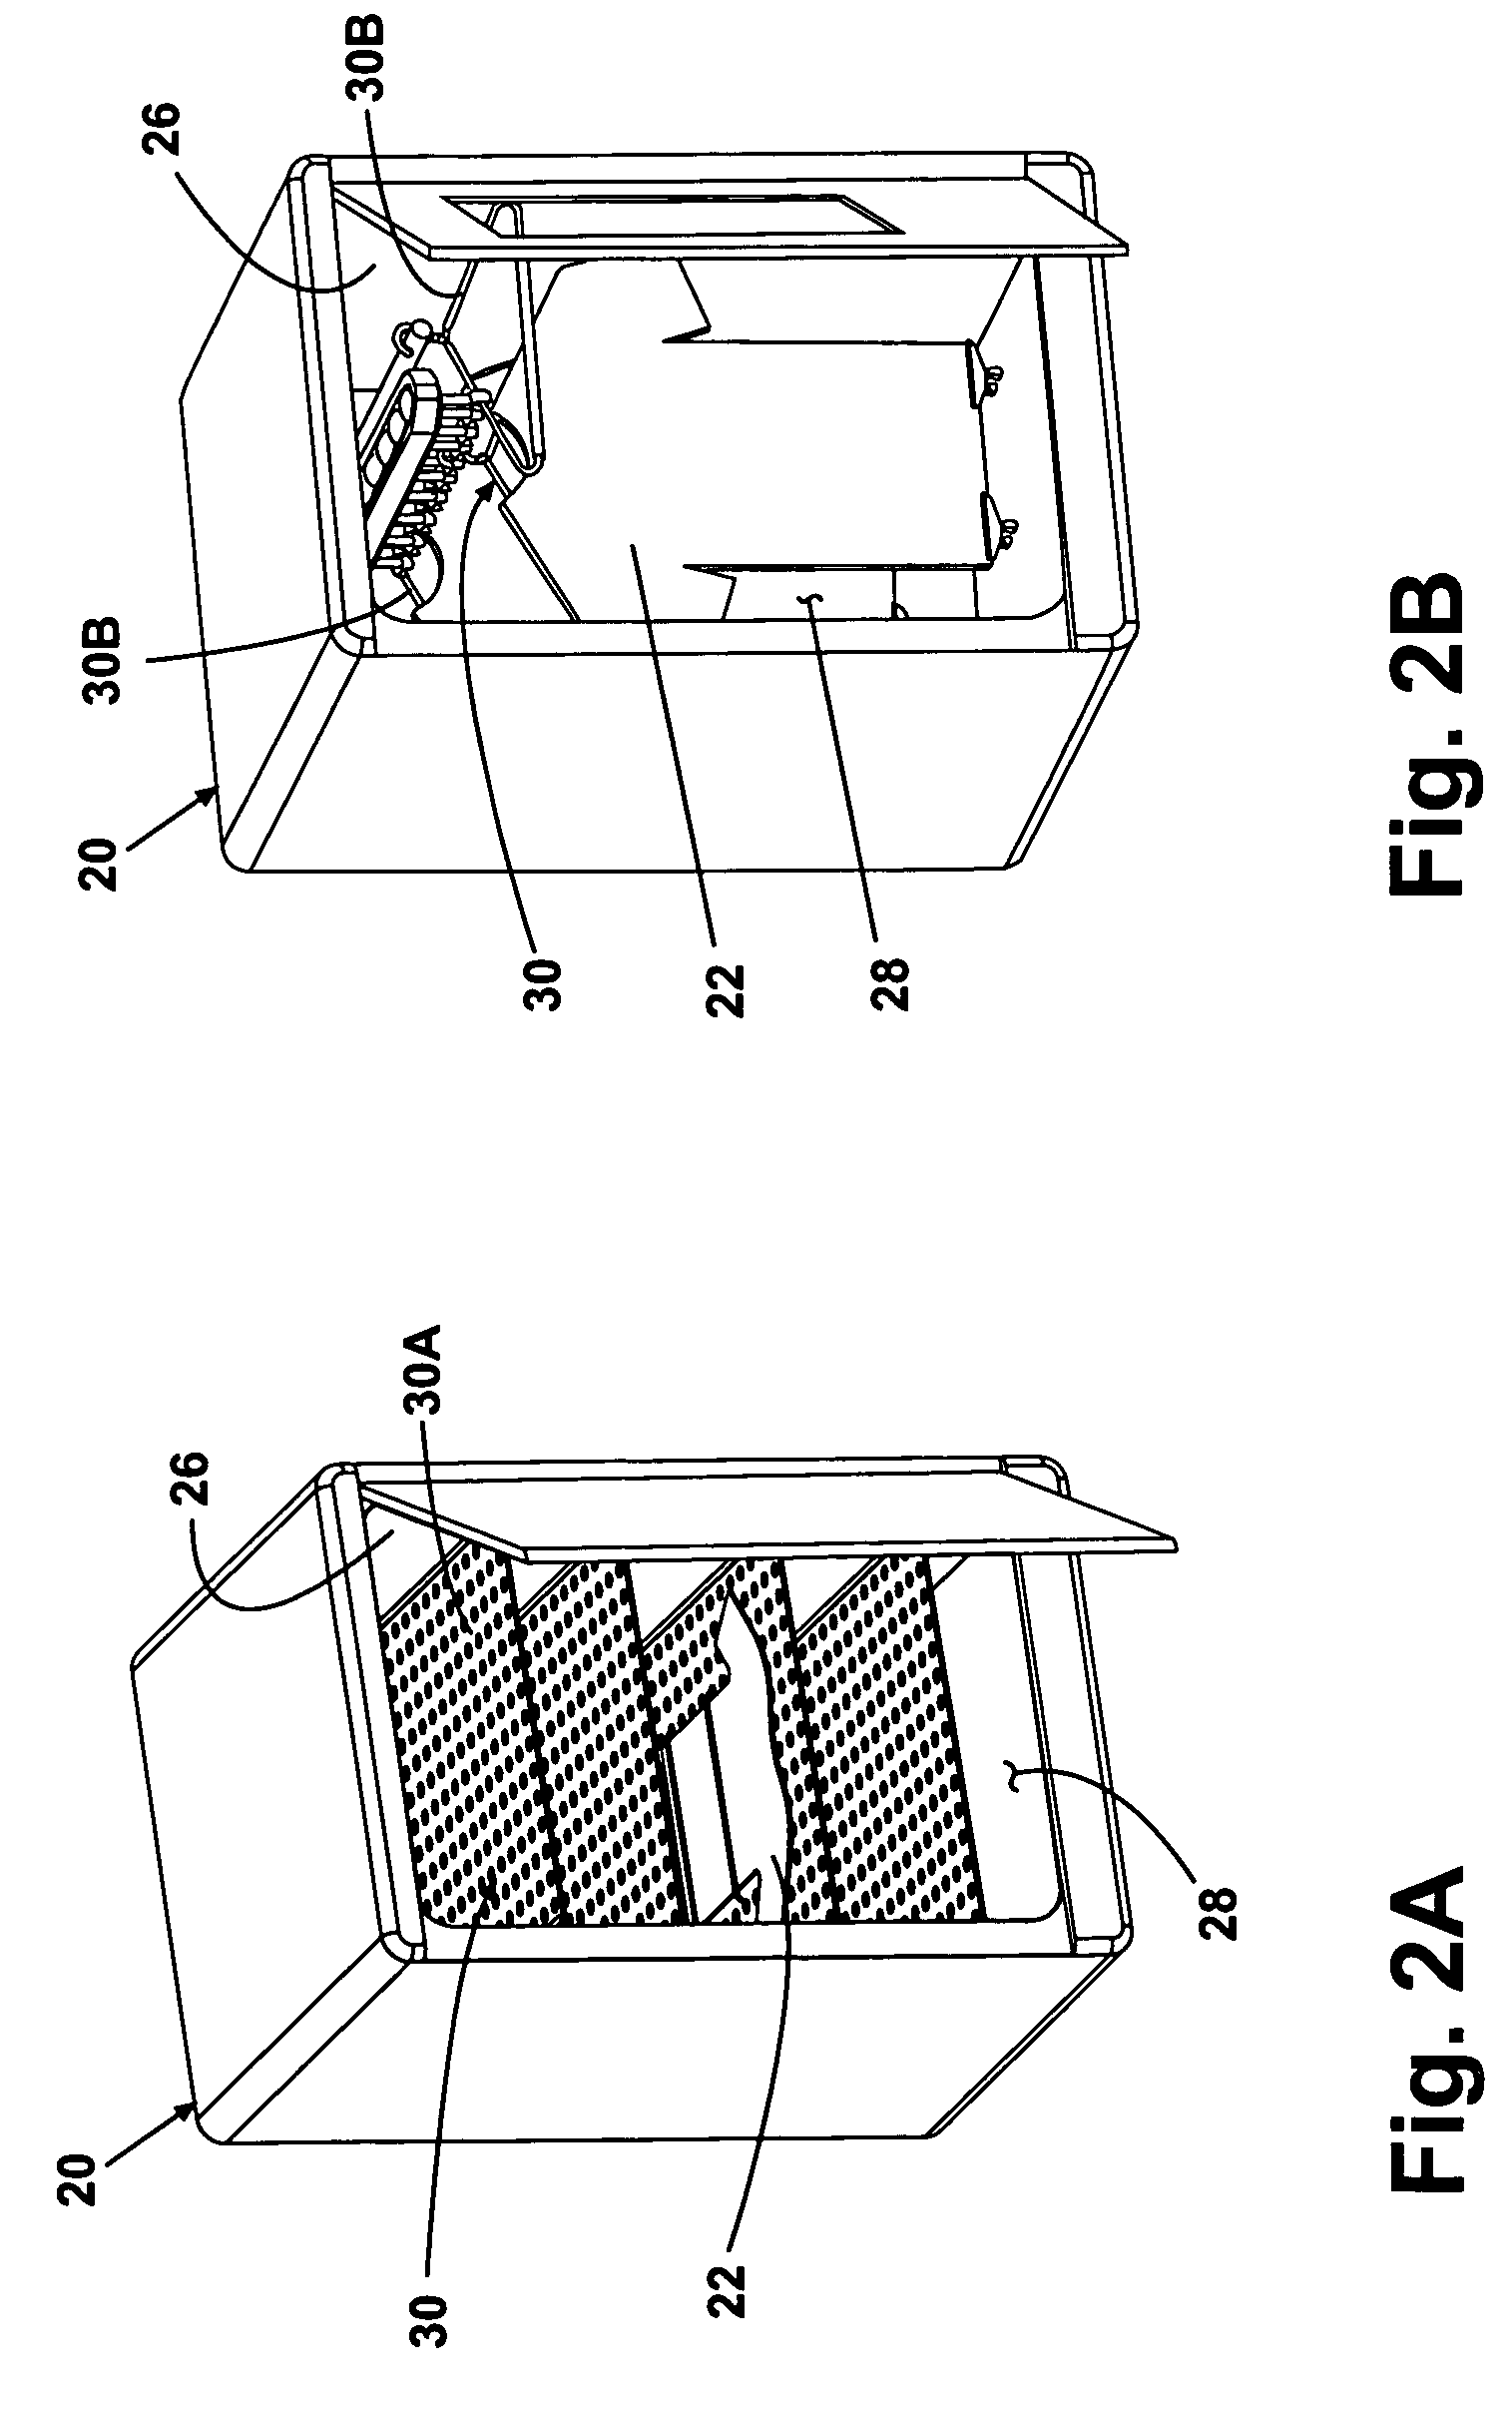 Automatic fabric treatment appliance with a manual fabric treatment station